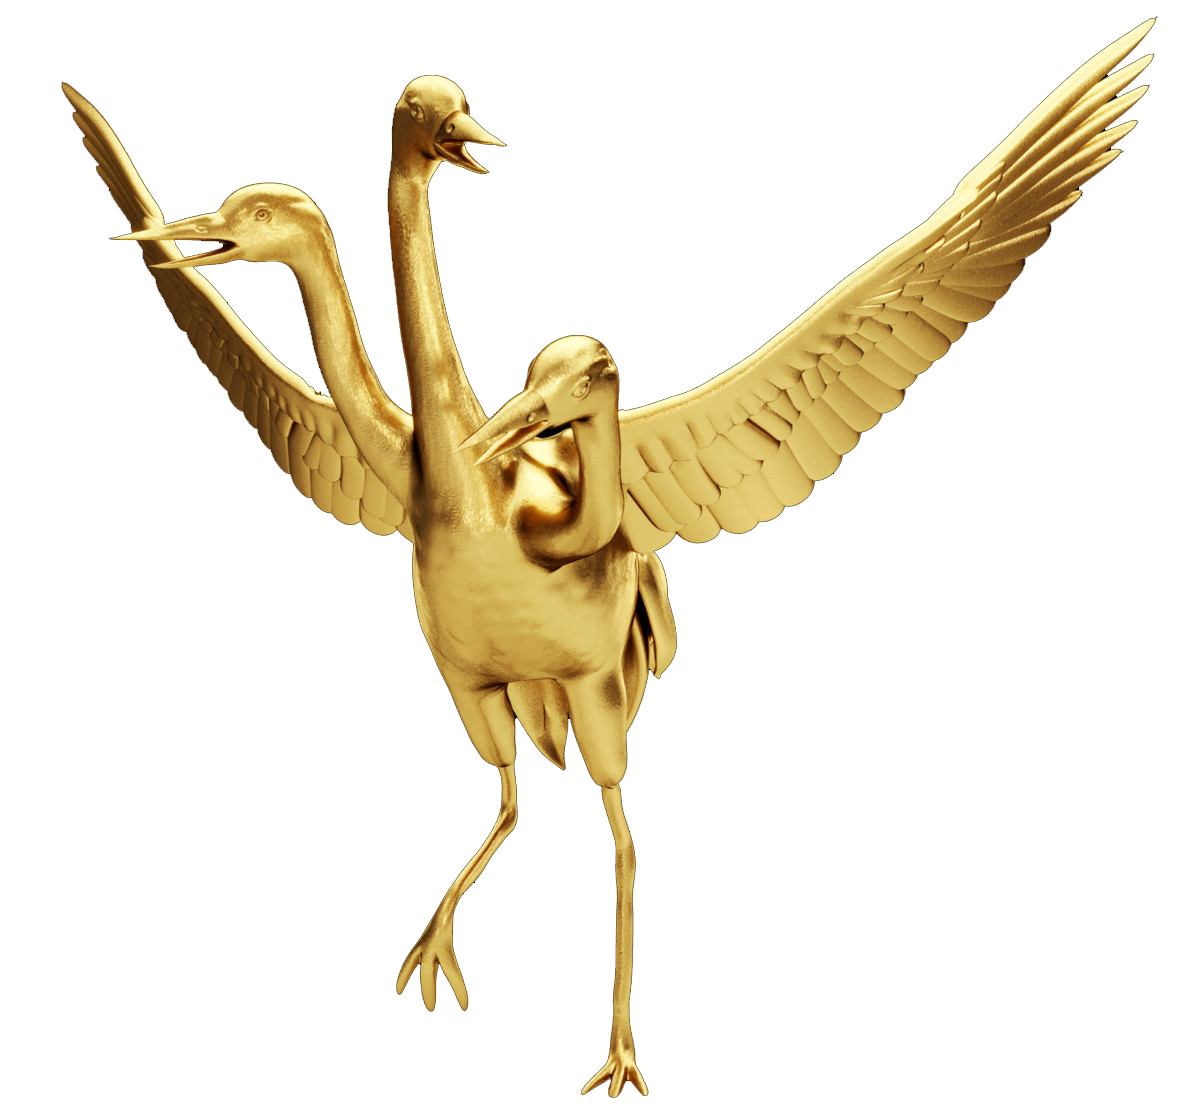 3-d rendering of a golden crane with three heads